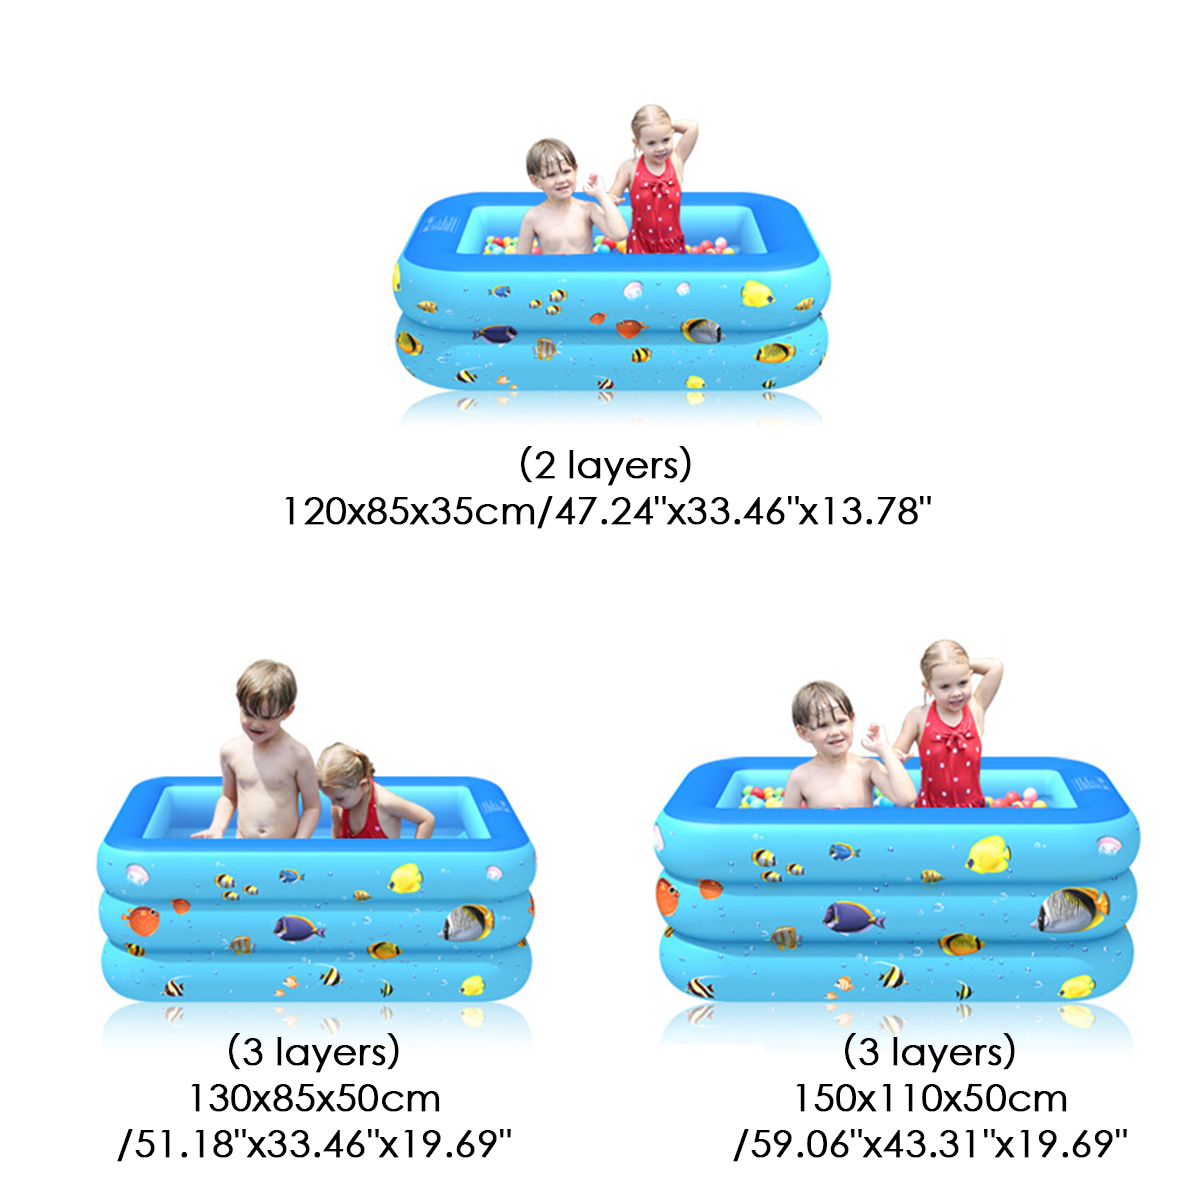 Inflatable-Swimming-Pool-Yard-Garden-Family-Kids-Play-Backyard-Blow-Up-Paddling-Pool-Bathing-Tub-Out-1689353-5